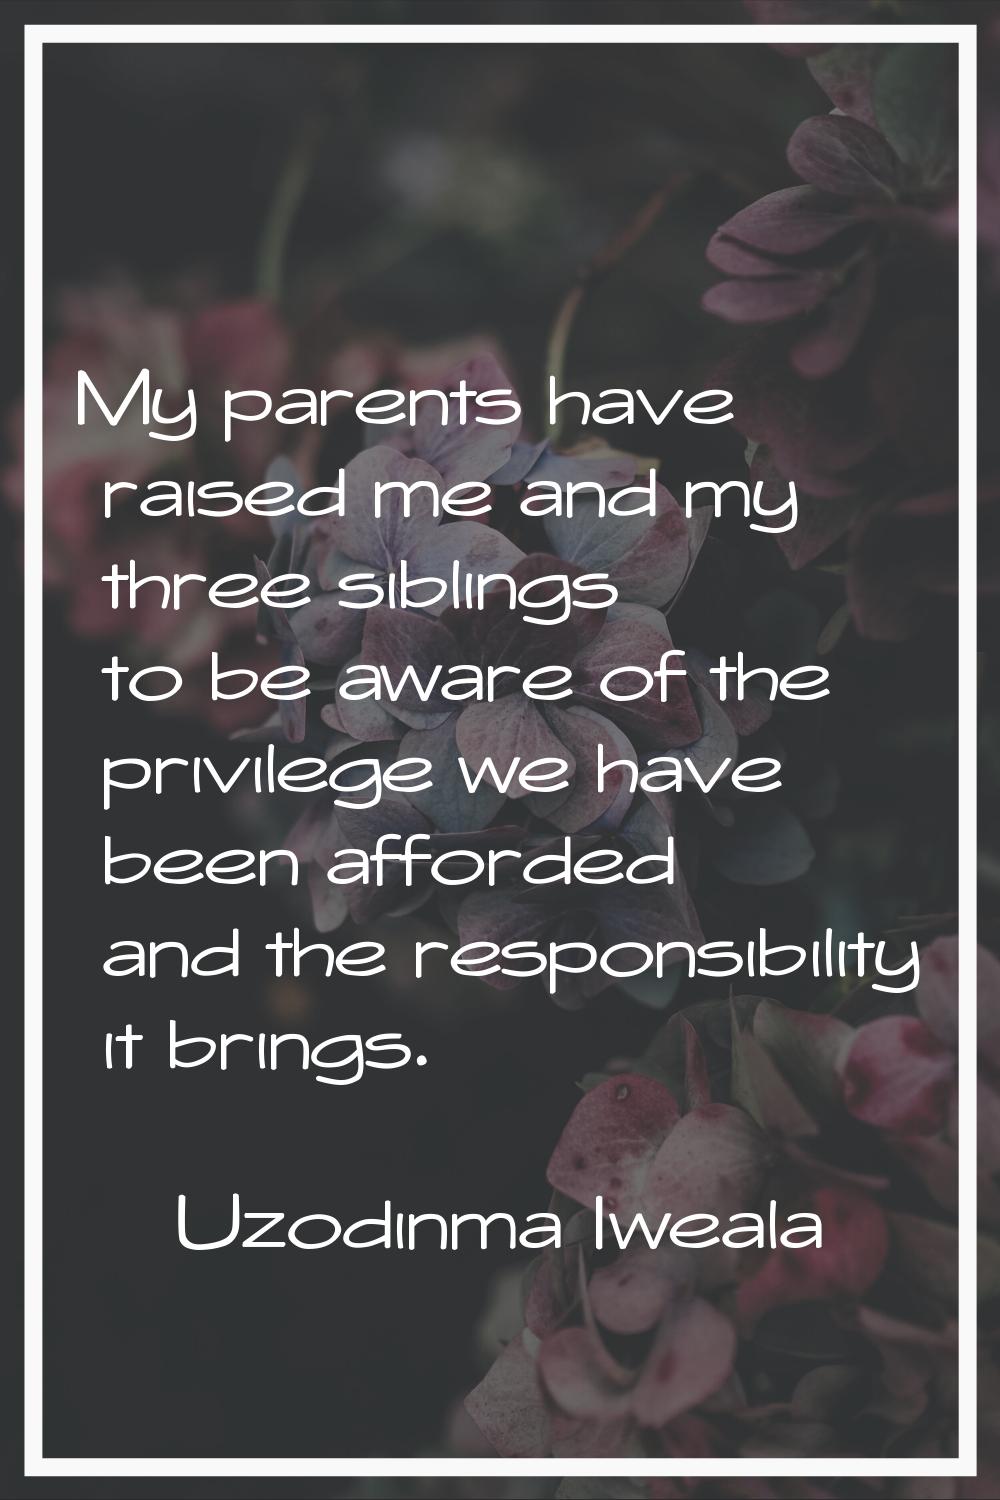 My parents have raised me and my three siblings to be aware of the privilege we have been afforded 